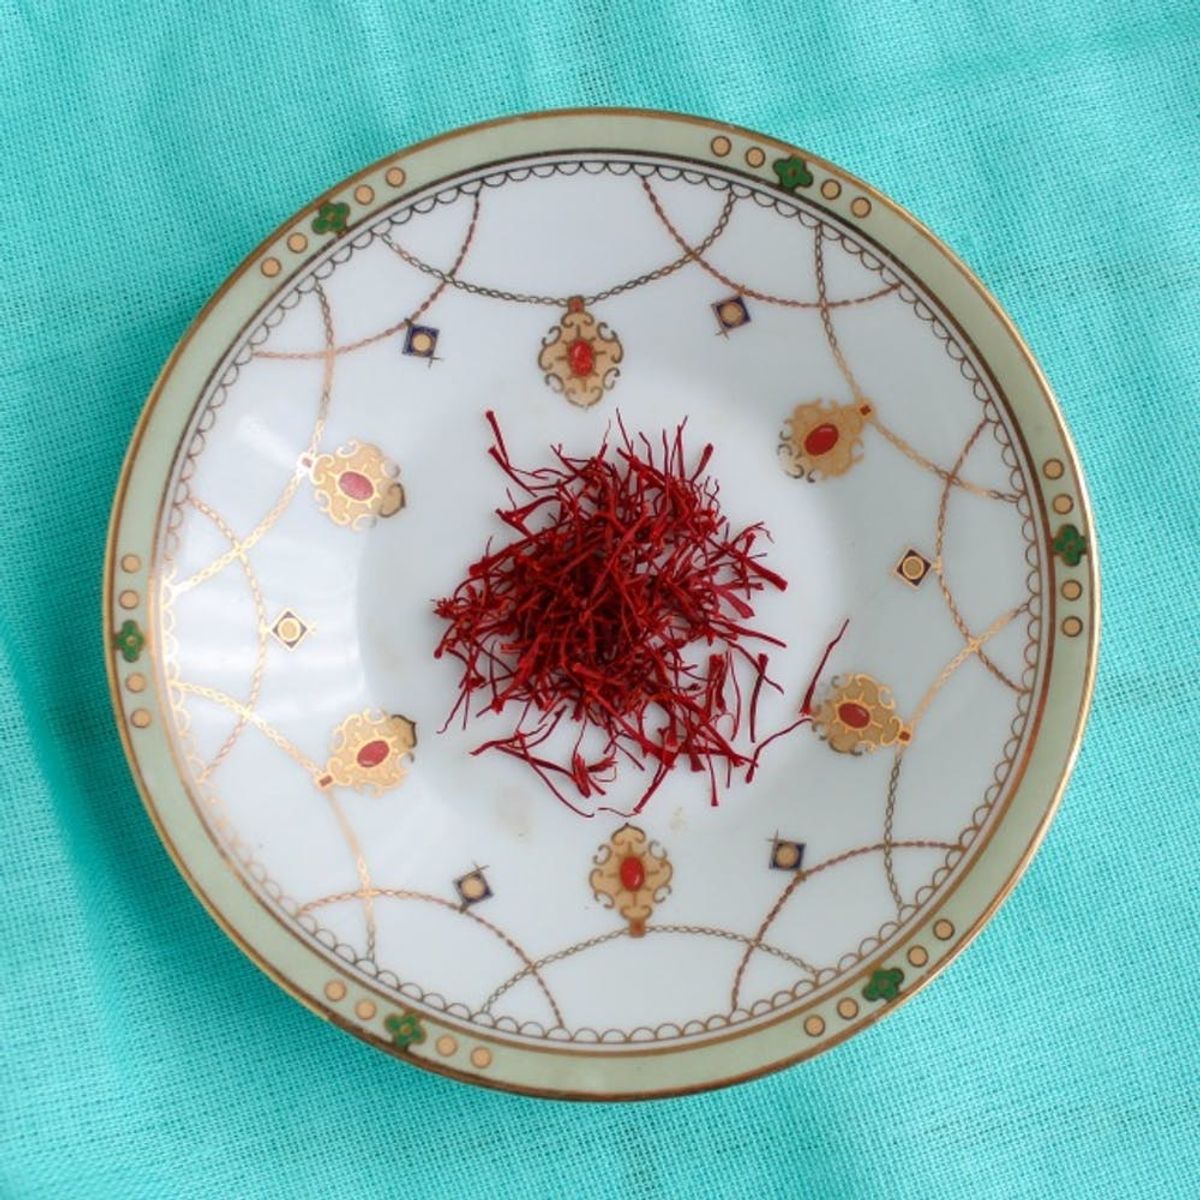 How (and Why!) to Cook With Colorful, Fragrant Saffron